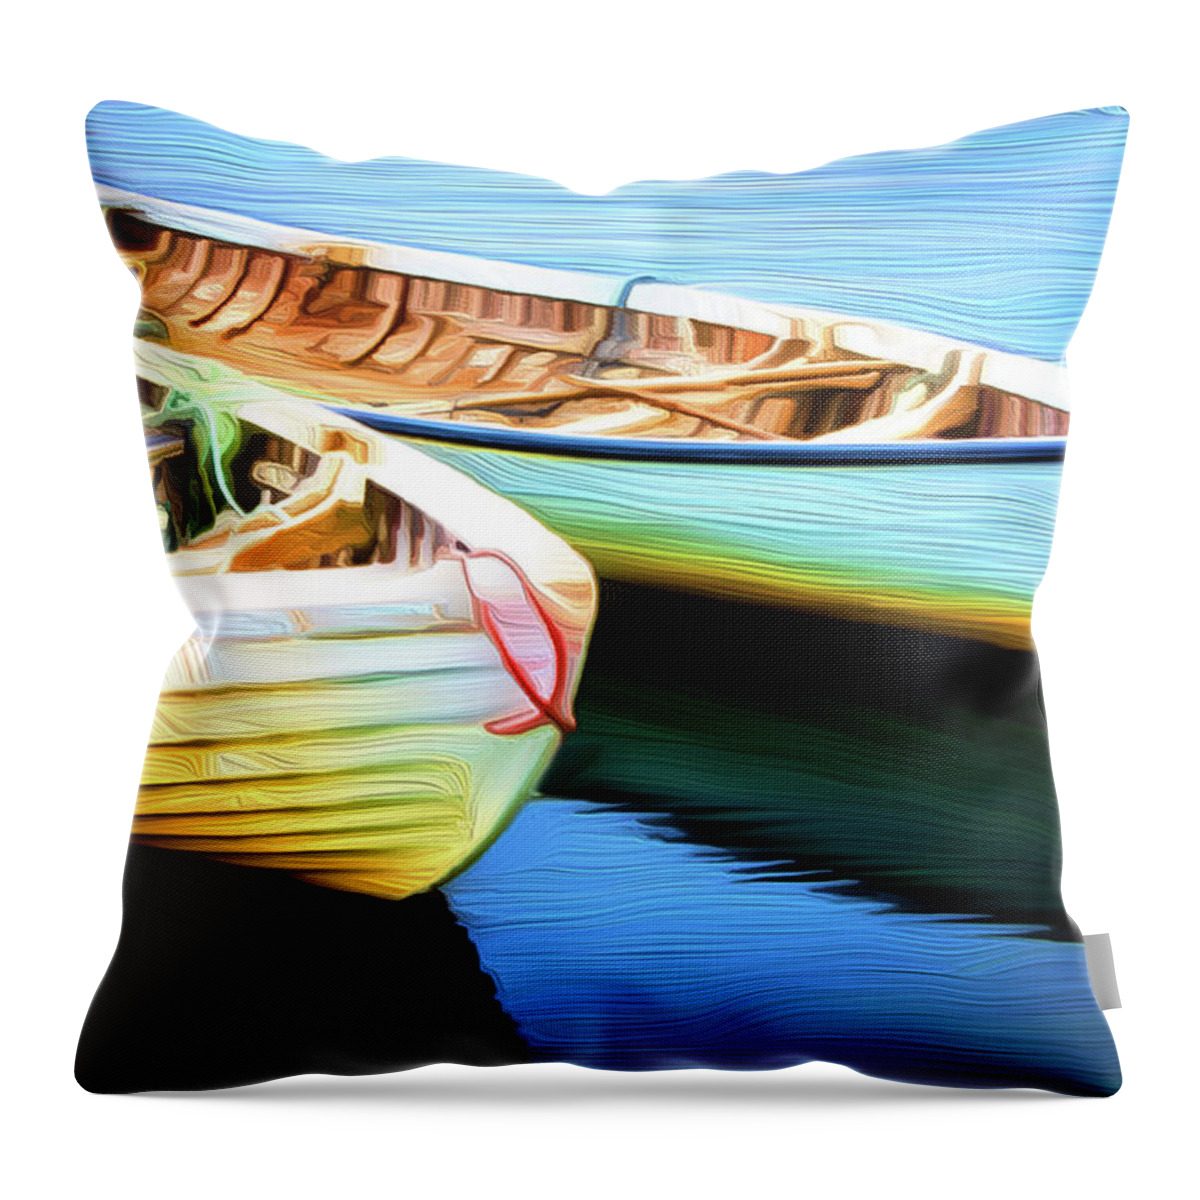 Boats Throw Pillow featuring the painting Boats by Prince Andre Faubert